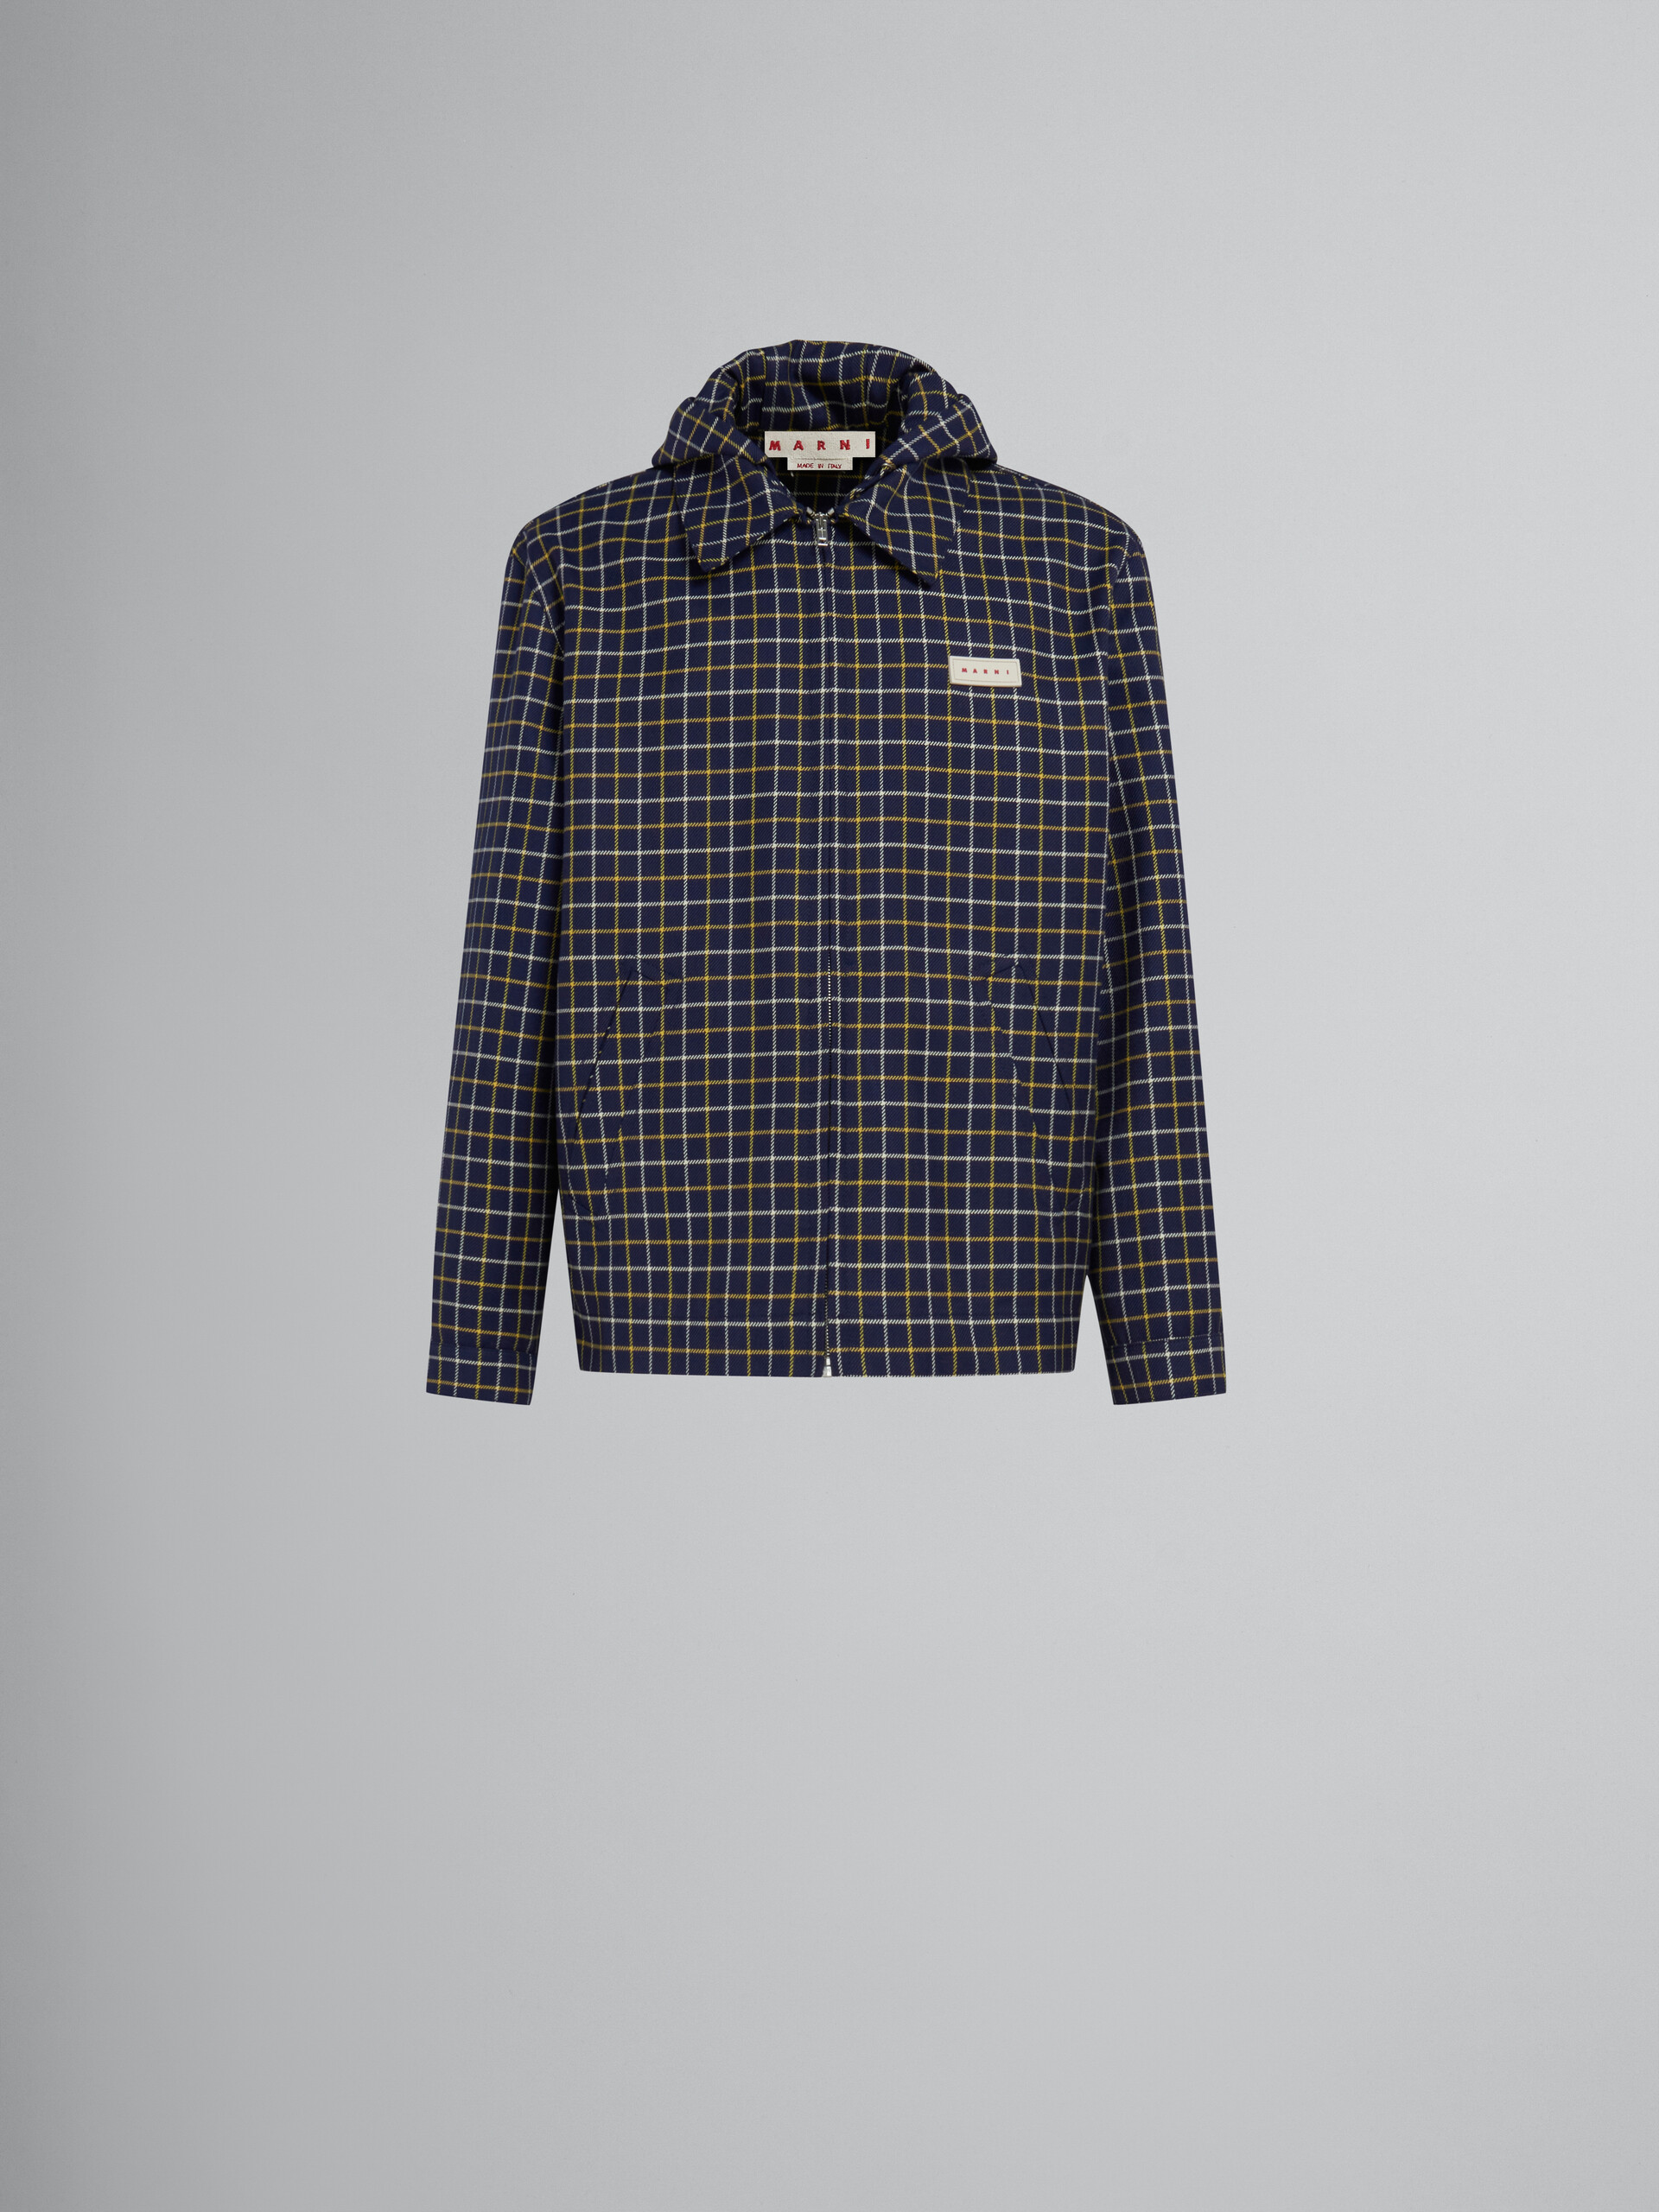 Blue checked wool and cotton overshirt - Jackets - Image 1